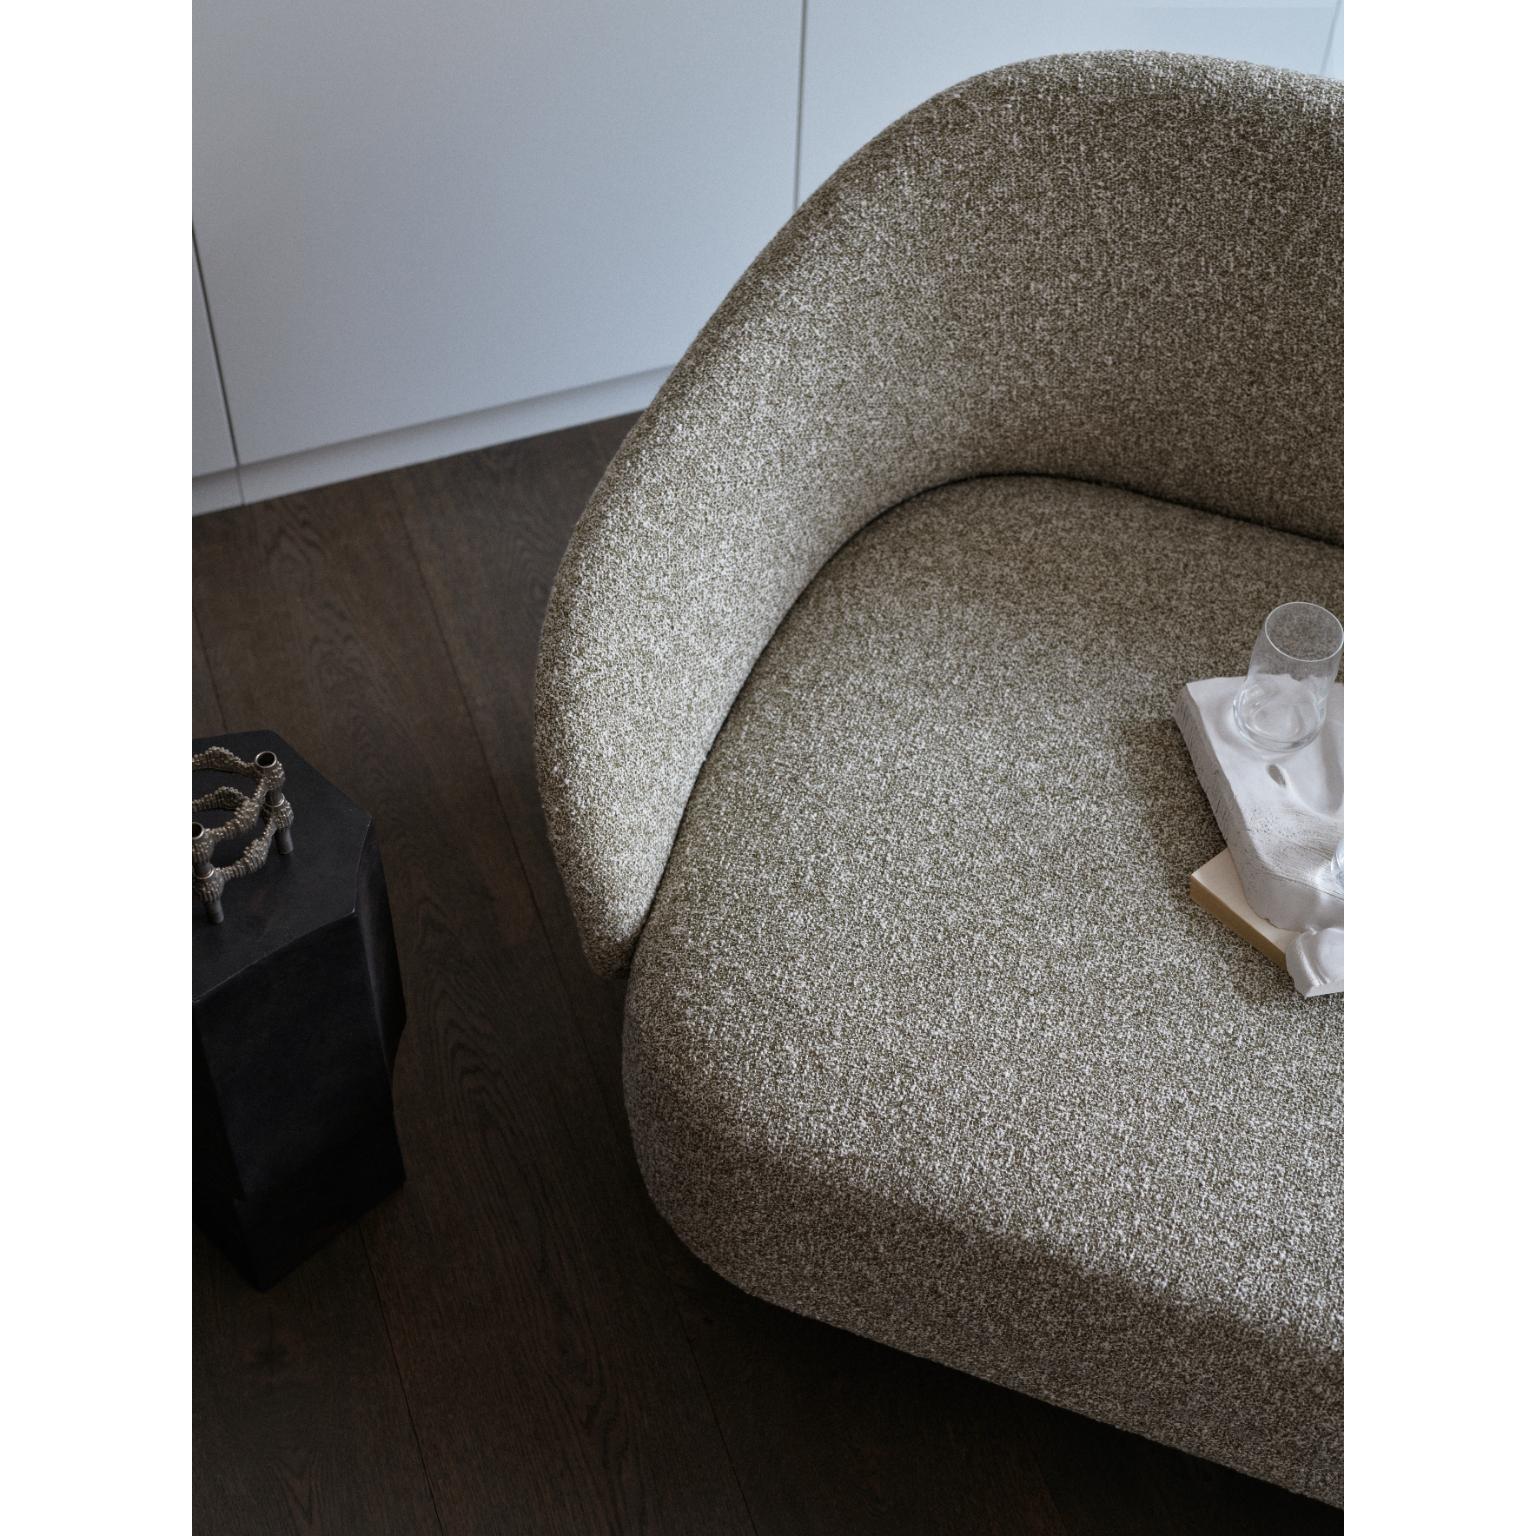 New Wave Open End Sofa by NORR11
Dimensions: D 90 x W 221 x H 94 cm. SH 41 cm. 
Materials: Brass, foam, plywood and upholstery.
Upholstery: Hallingdal 116.
Weight: 68 kg.

Available in different oak finishes: Natural oak, light smoked oak, dark